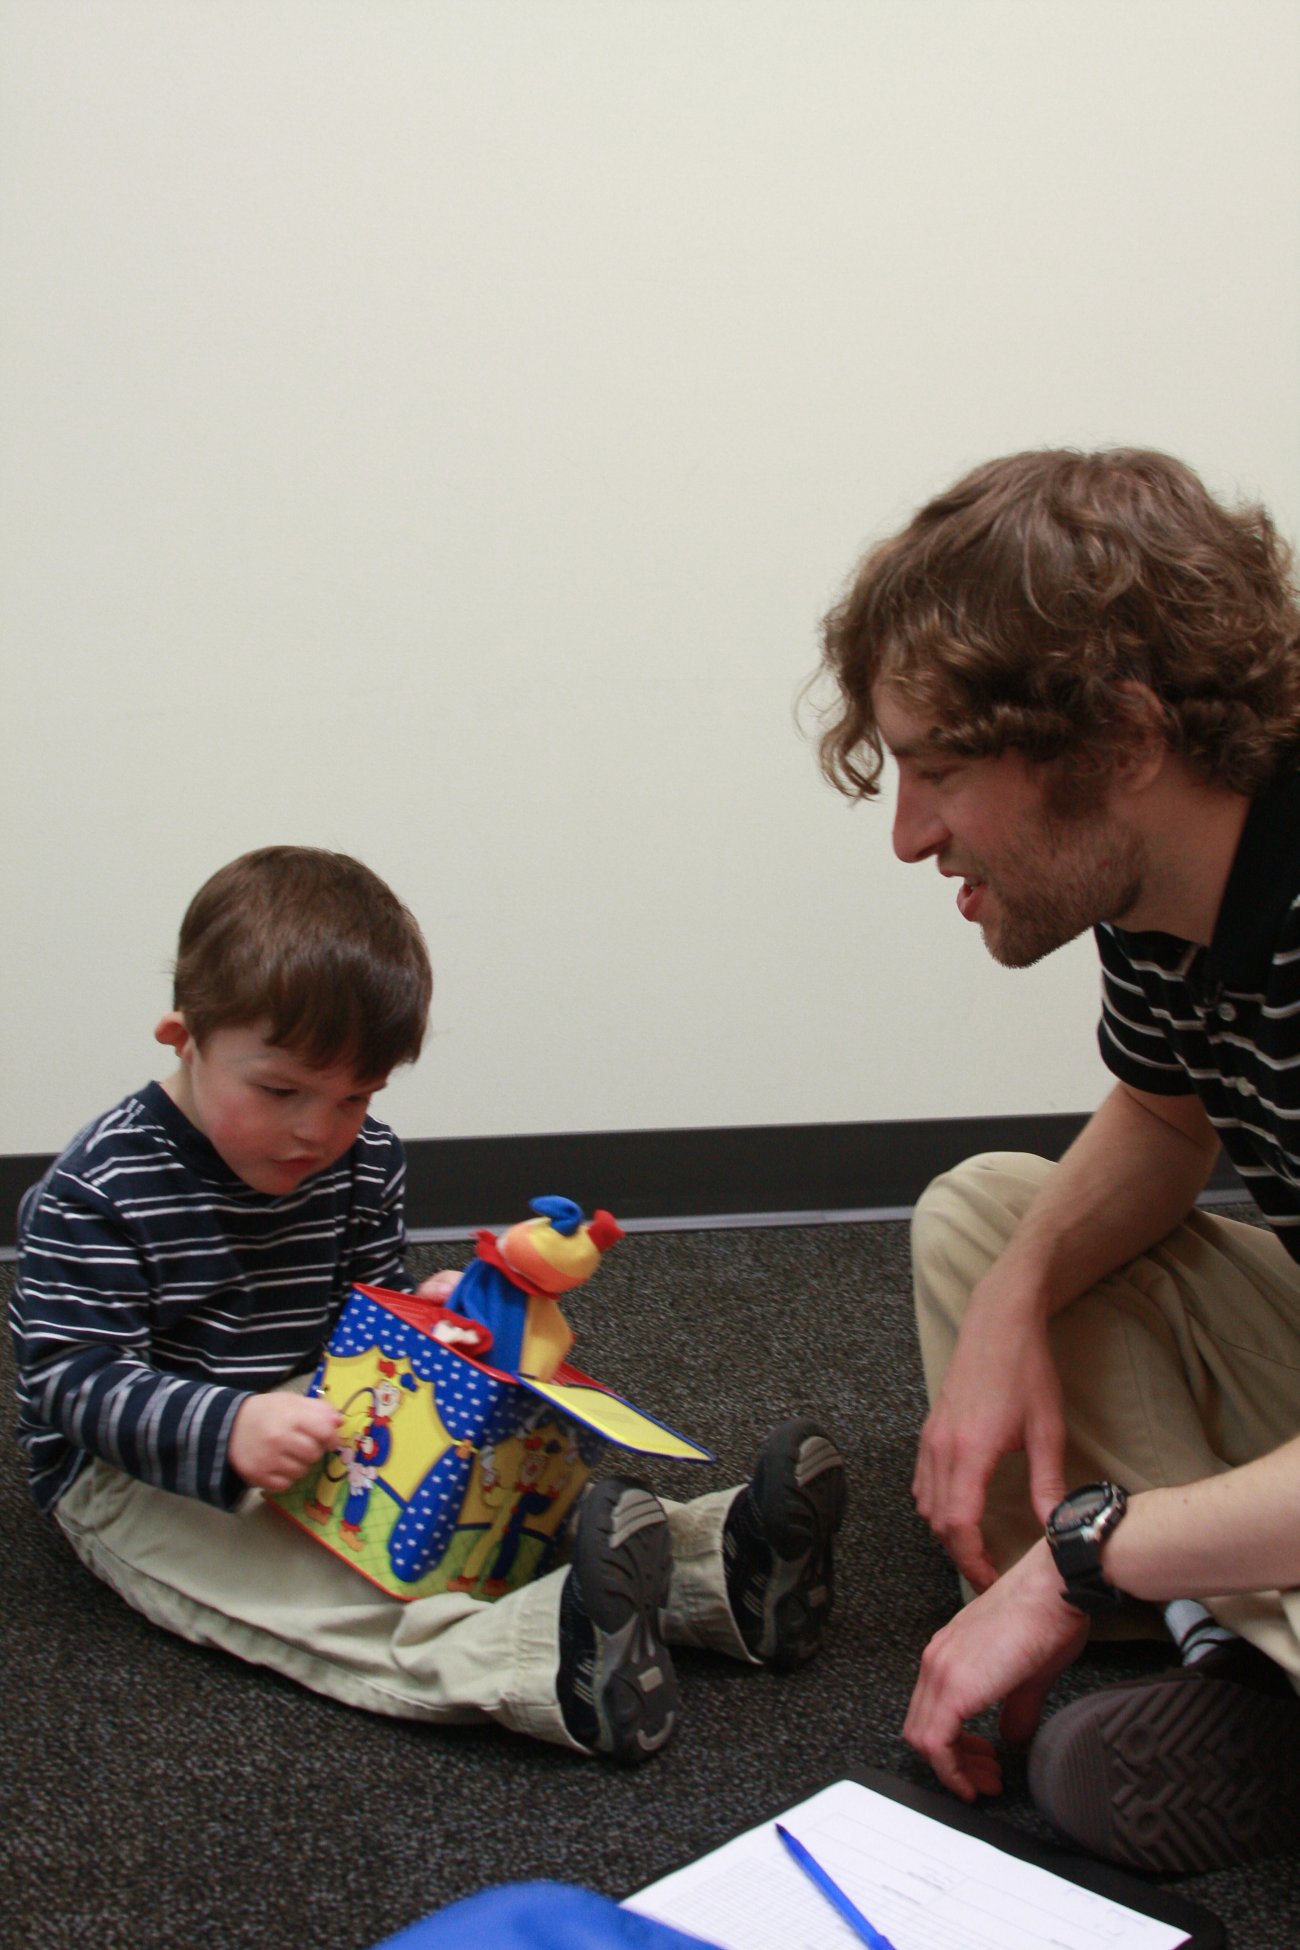 a child plays with a jack in the box while a pathology student watches.